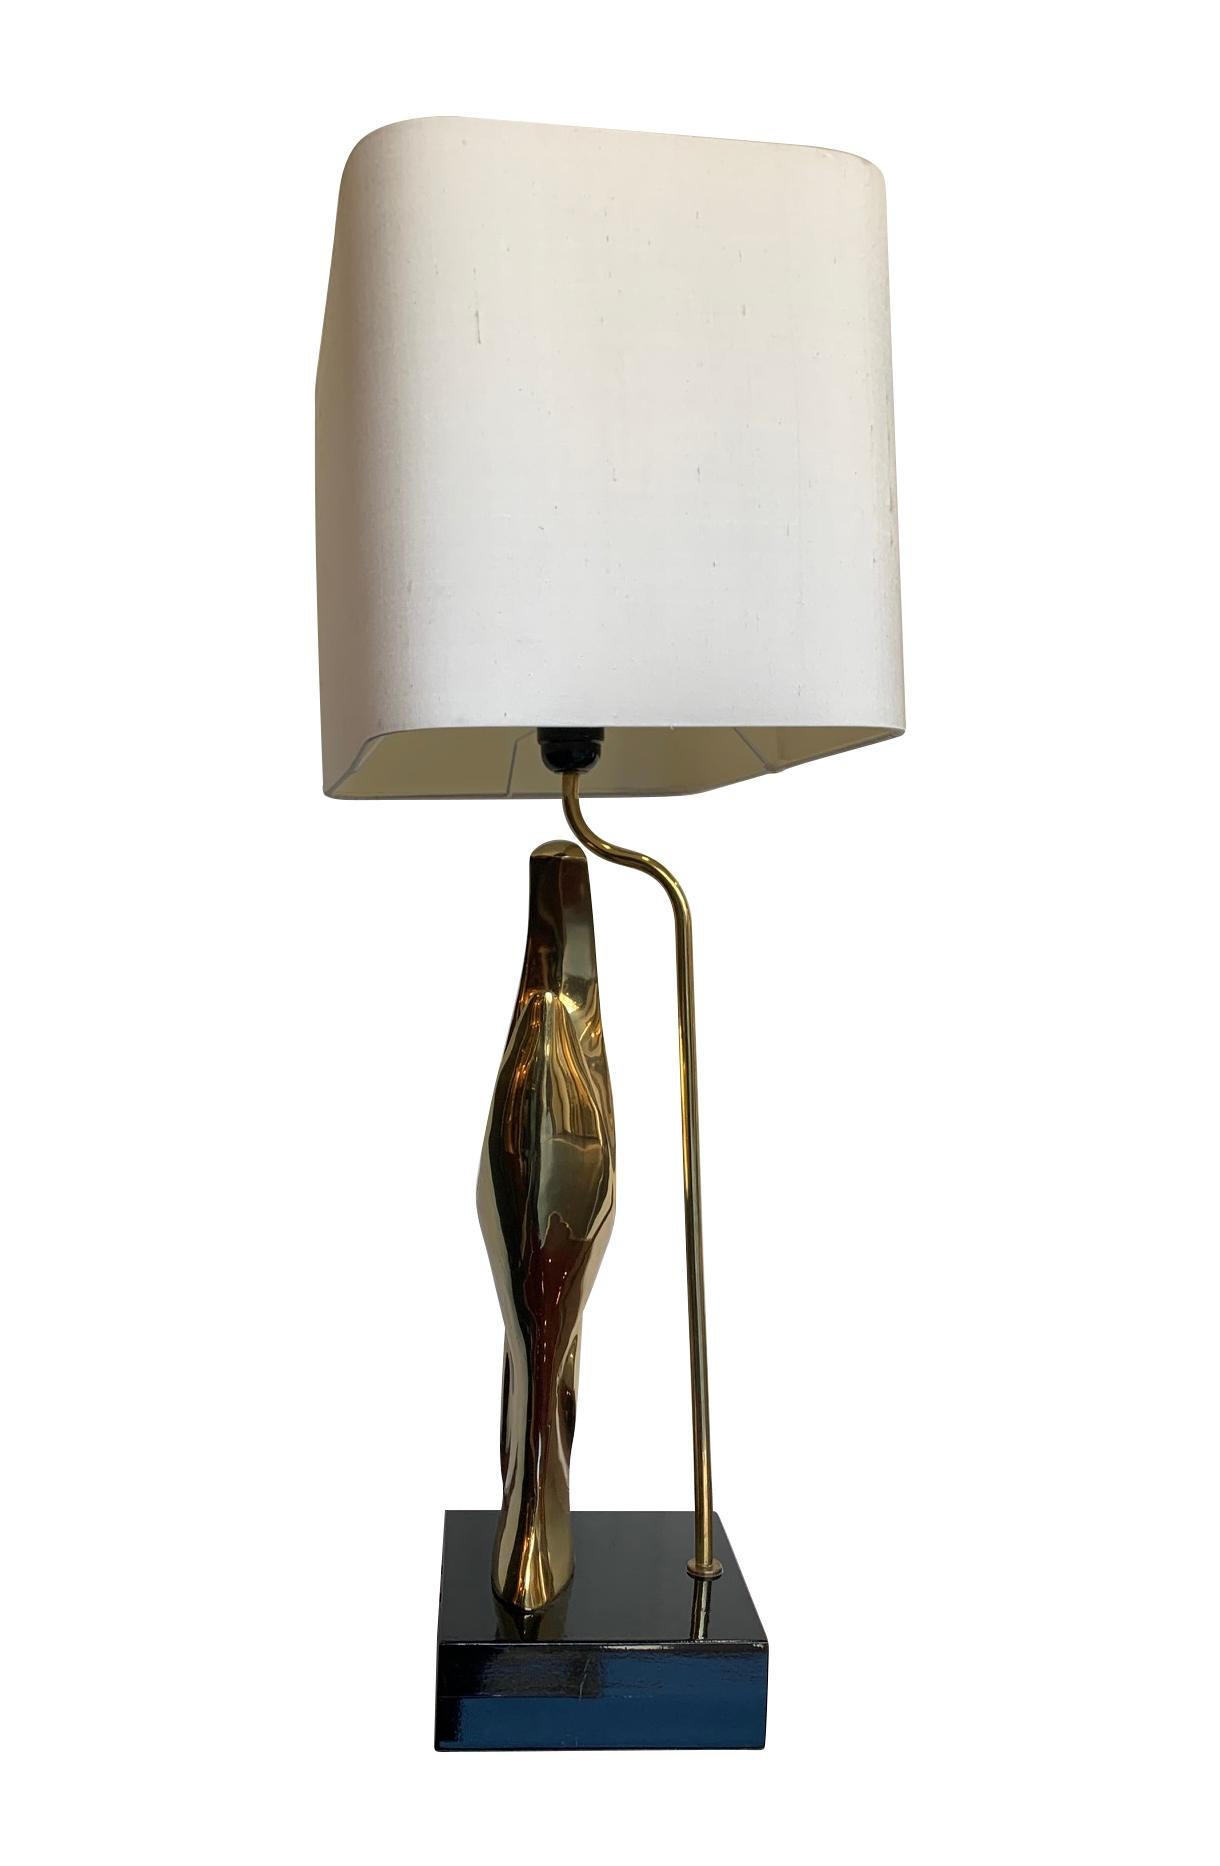 1970s Sculptural Lamp in the Style of Alain Chervet with Black Lacquered Base 4